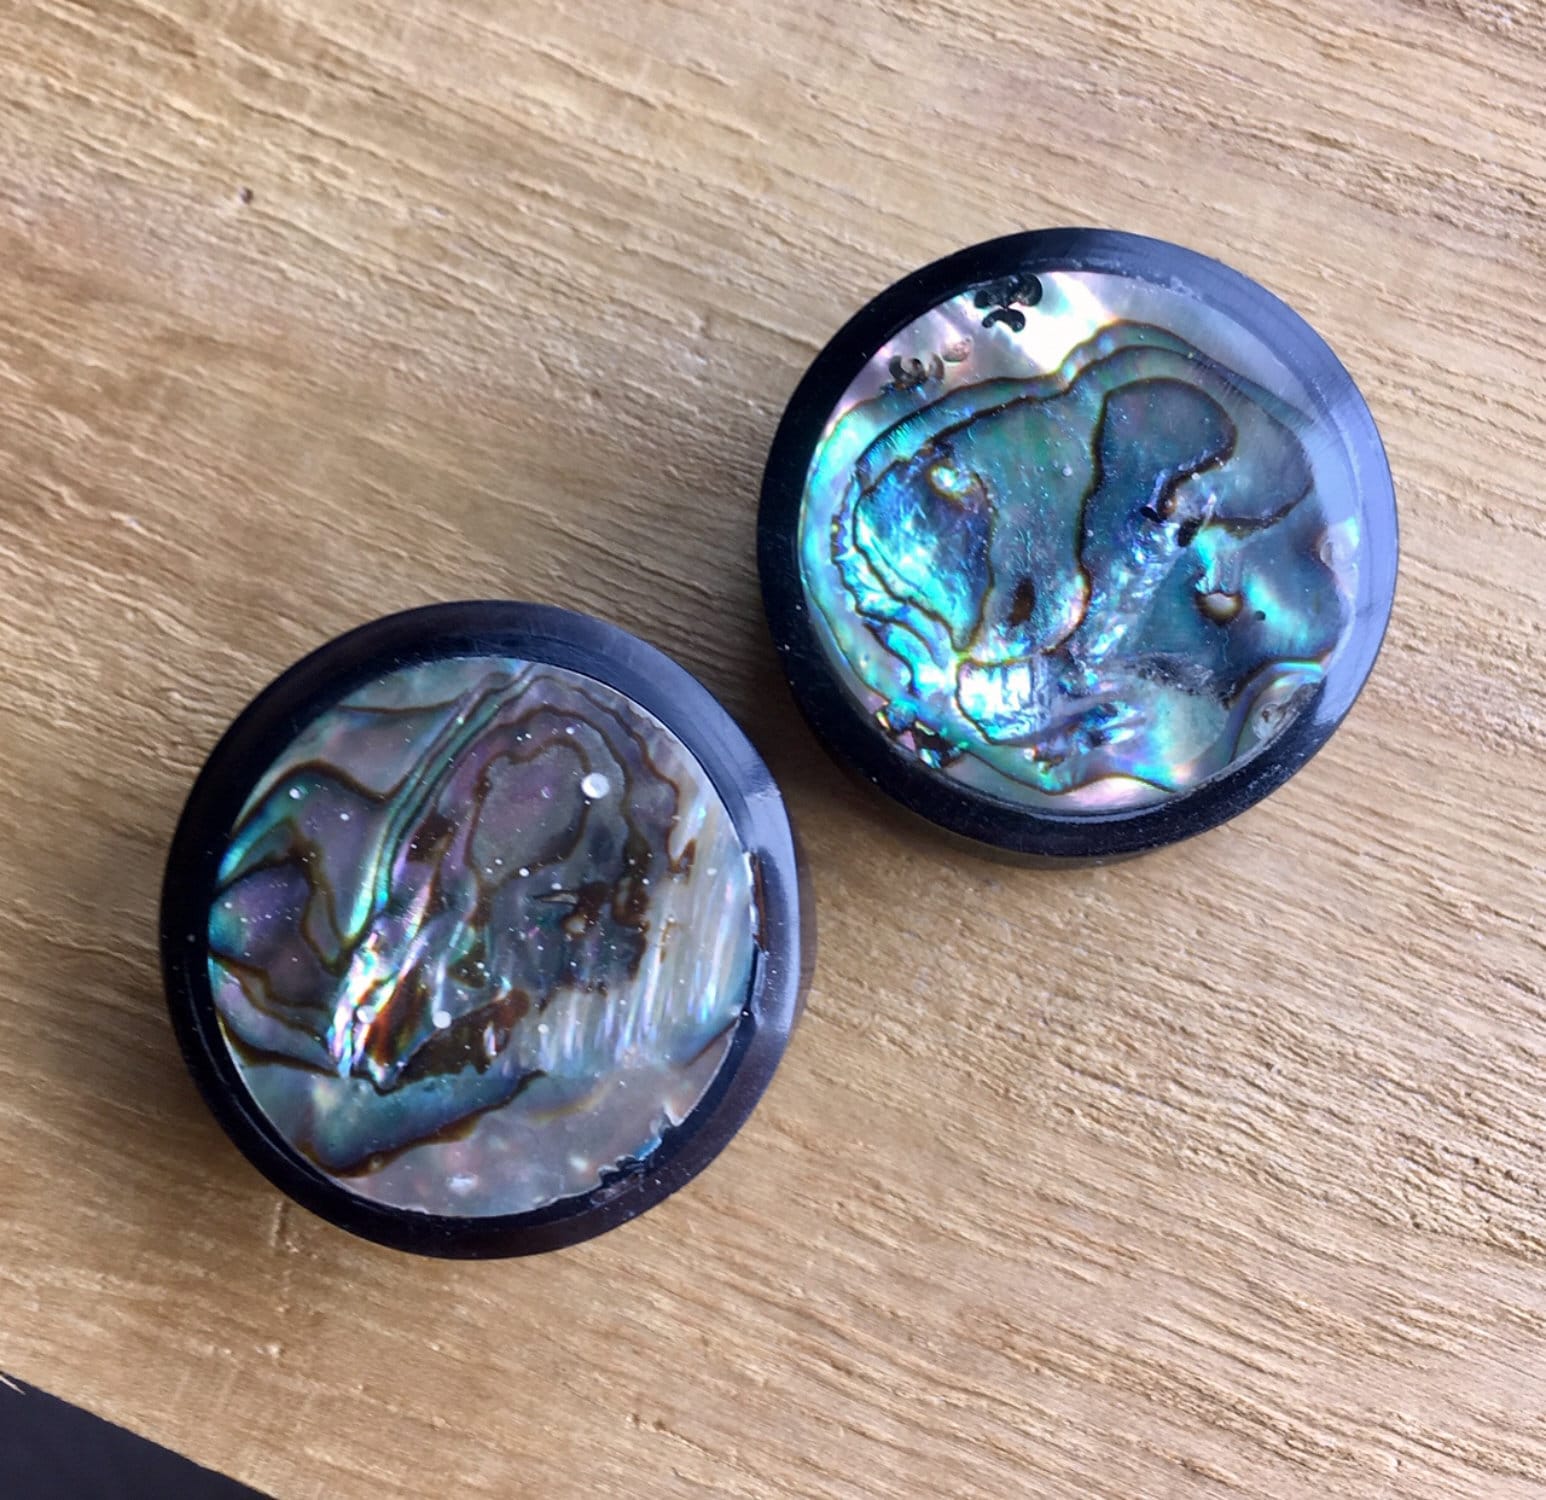 PAIR of Stunning Organic Horn with Abalone Inlay Plugs - Gauges 4g (5mm) up to 1" (25mm) available!